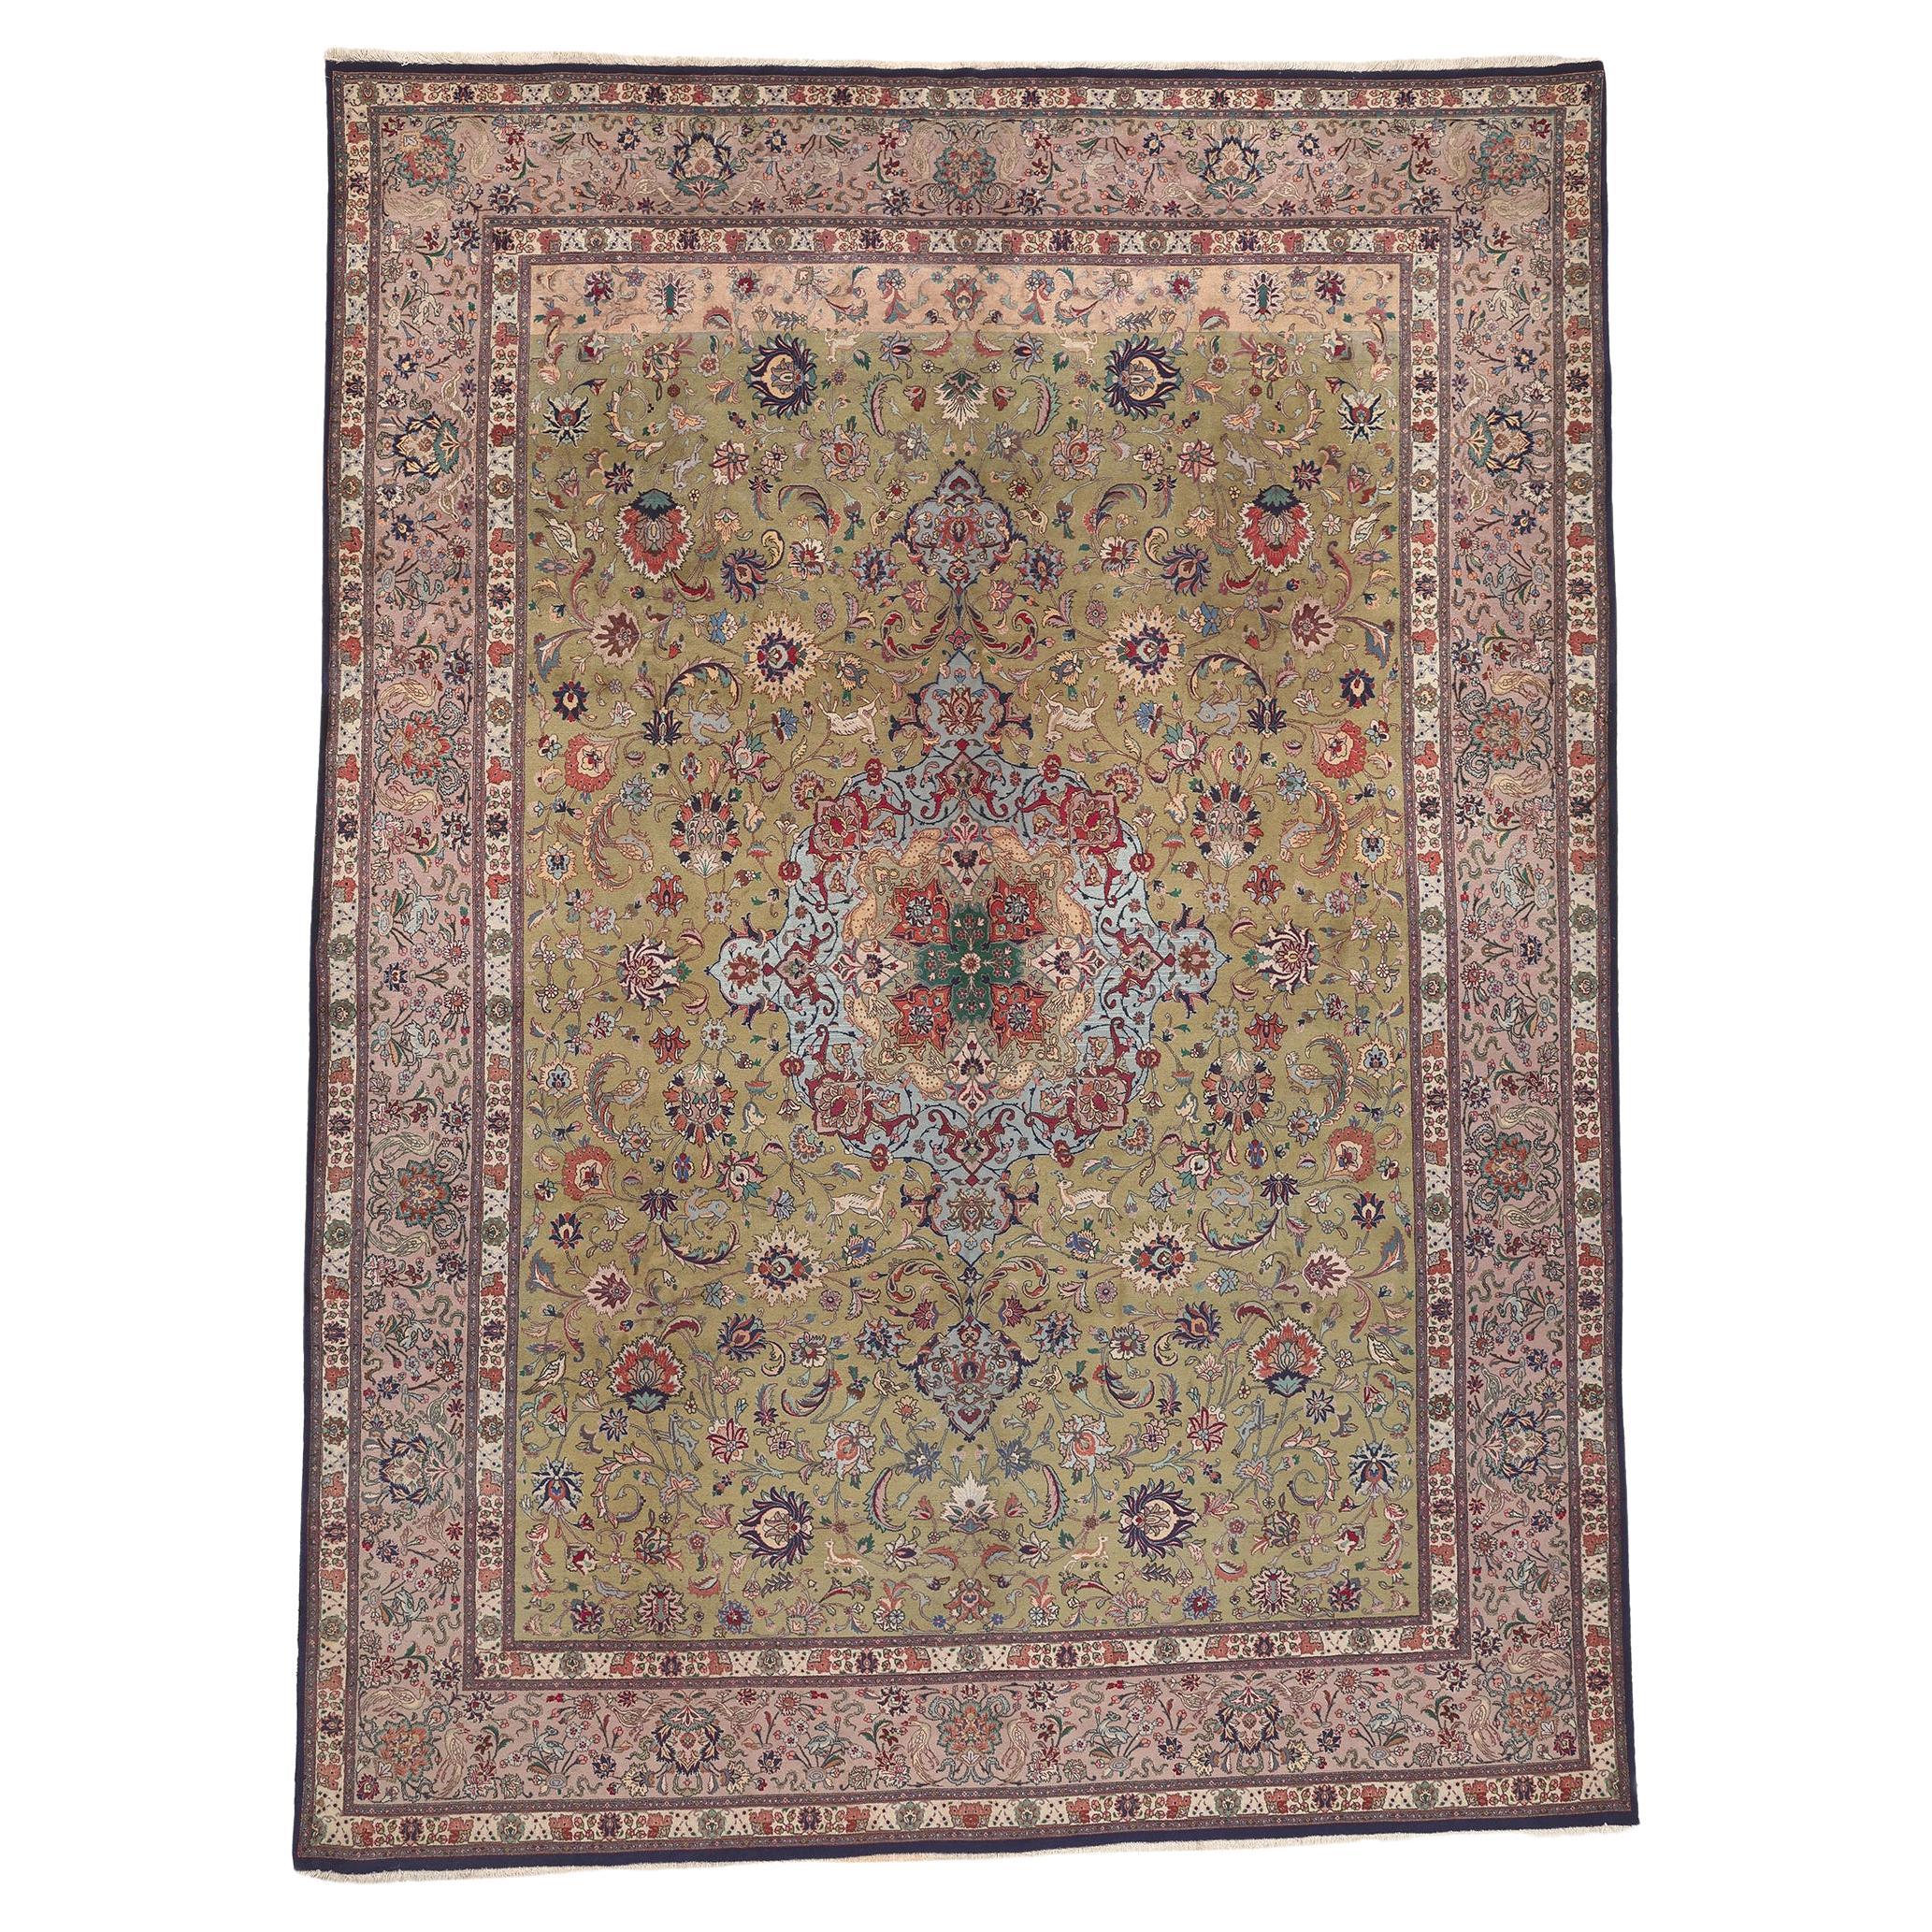 Vintage Persian Tabriz Rug, Traditional Style Meets Timeless Appeal